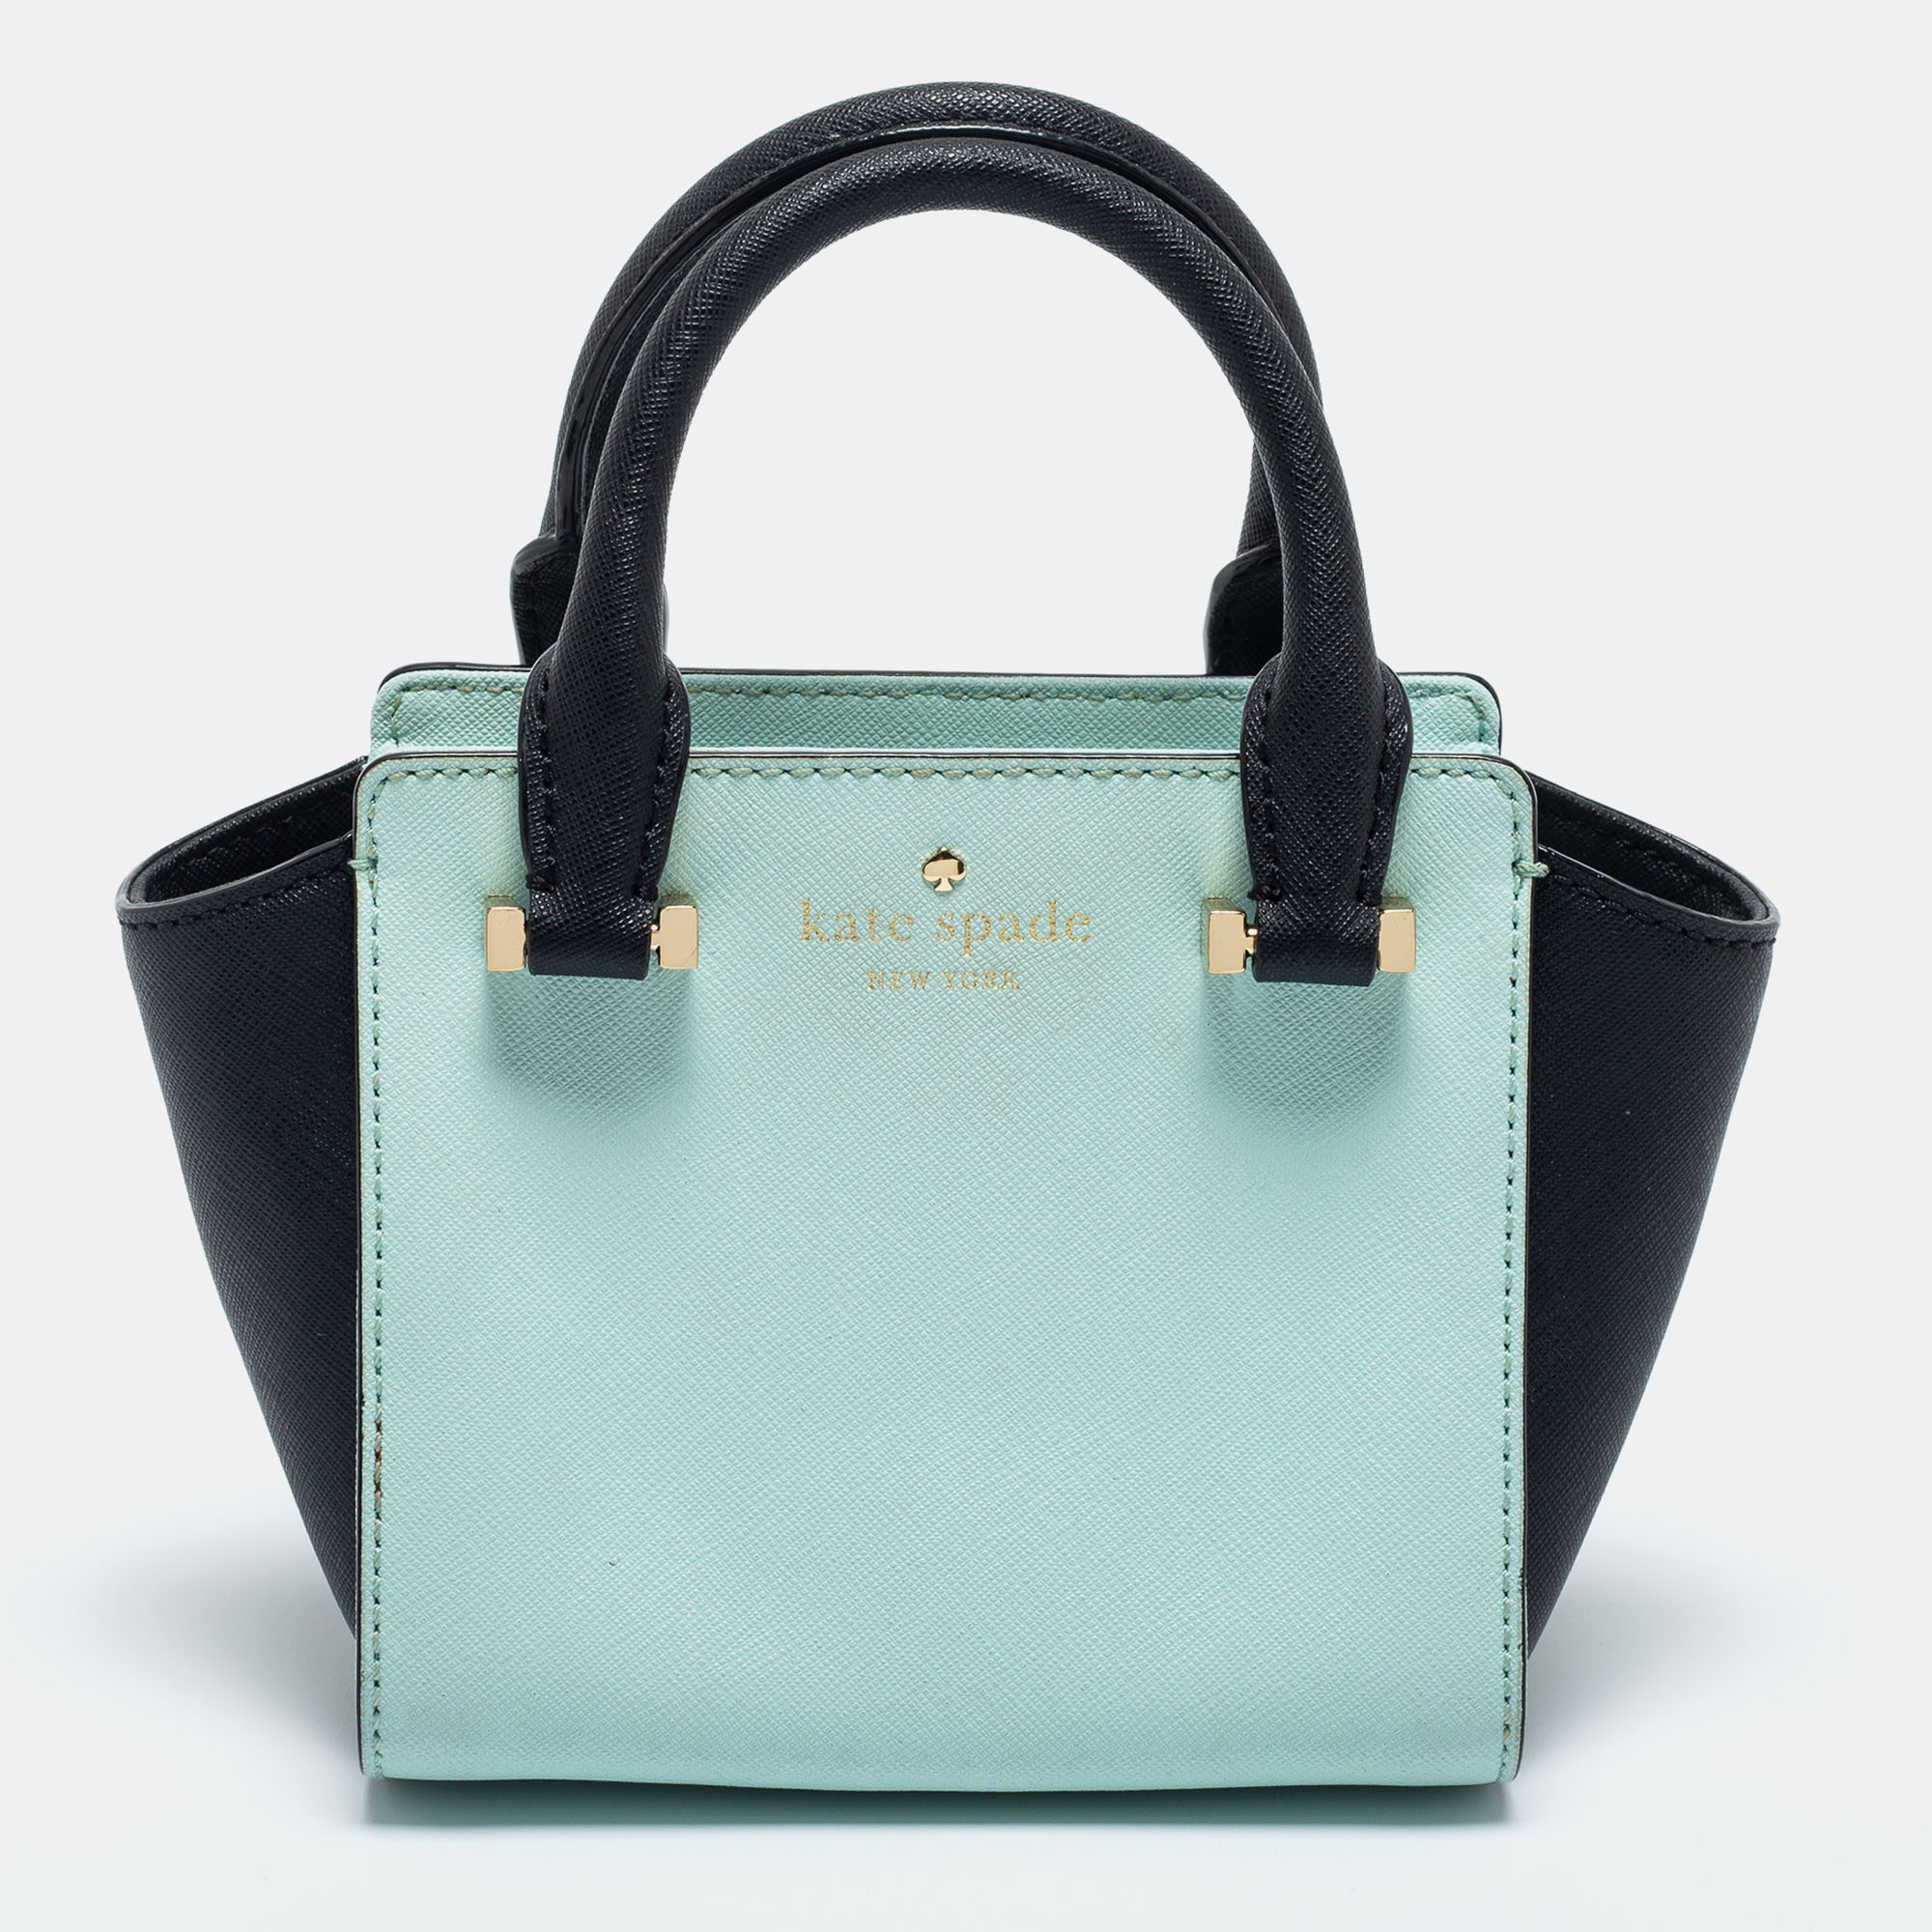 Pre-owned Kate Spade Green/black Leather Tote